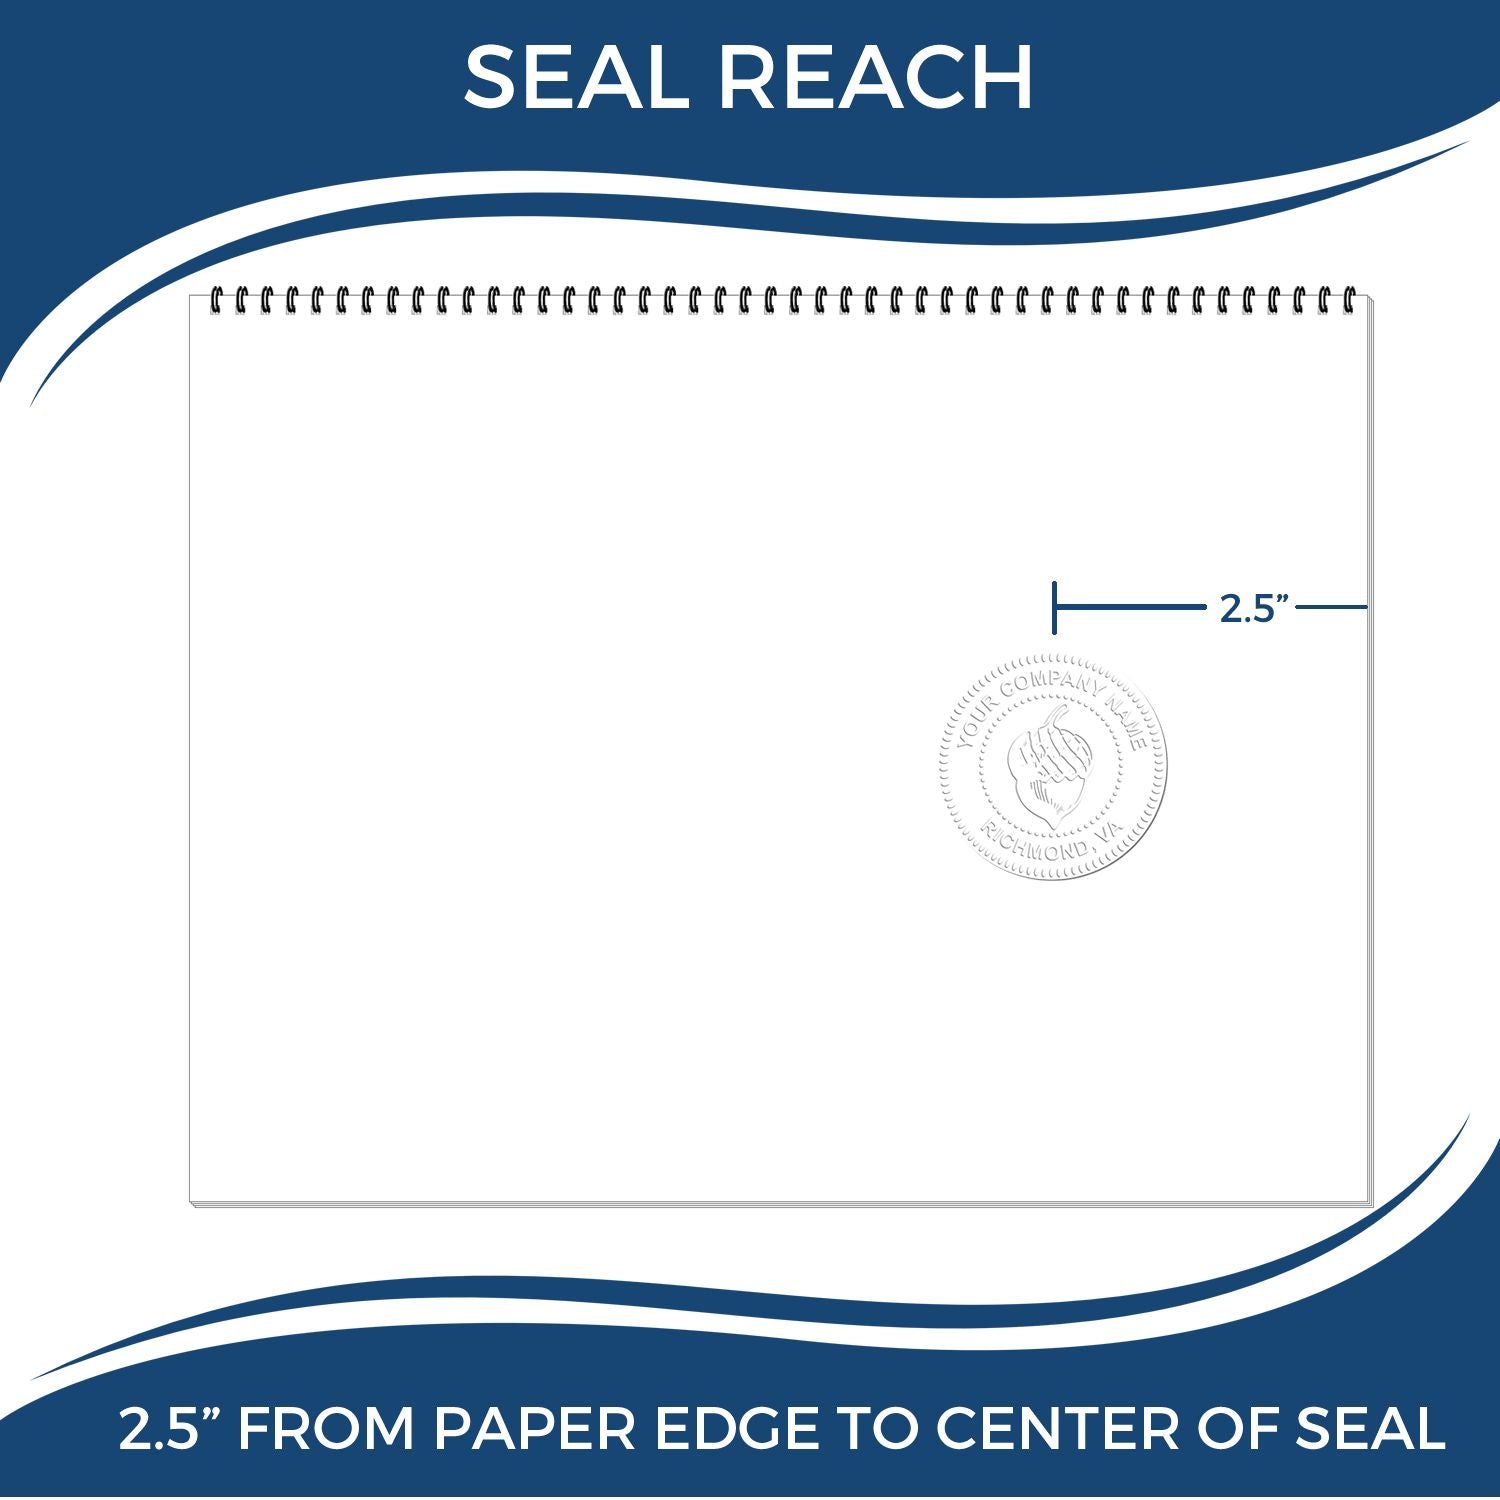 An infographic showing the seal reach which is represented by a ruler and a miniature seal image of the Heavy Duty Cast Iron Michigan Land Surveyor Seal Embosser